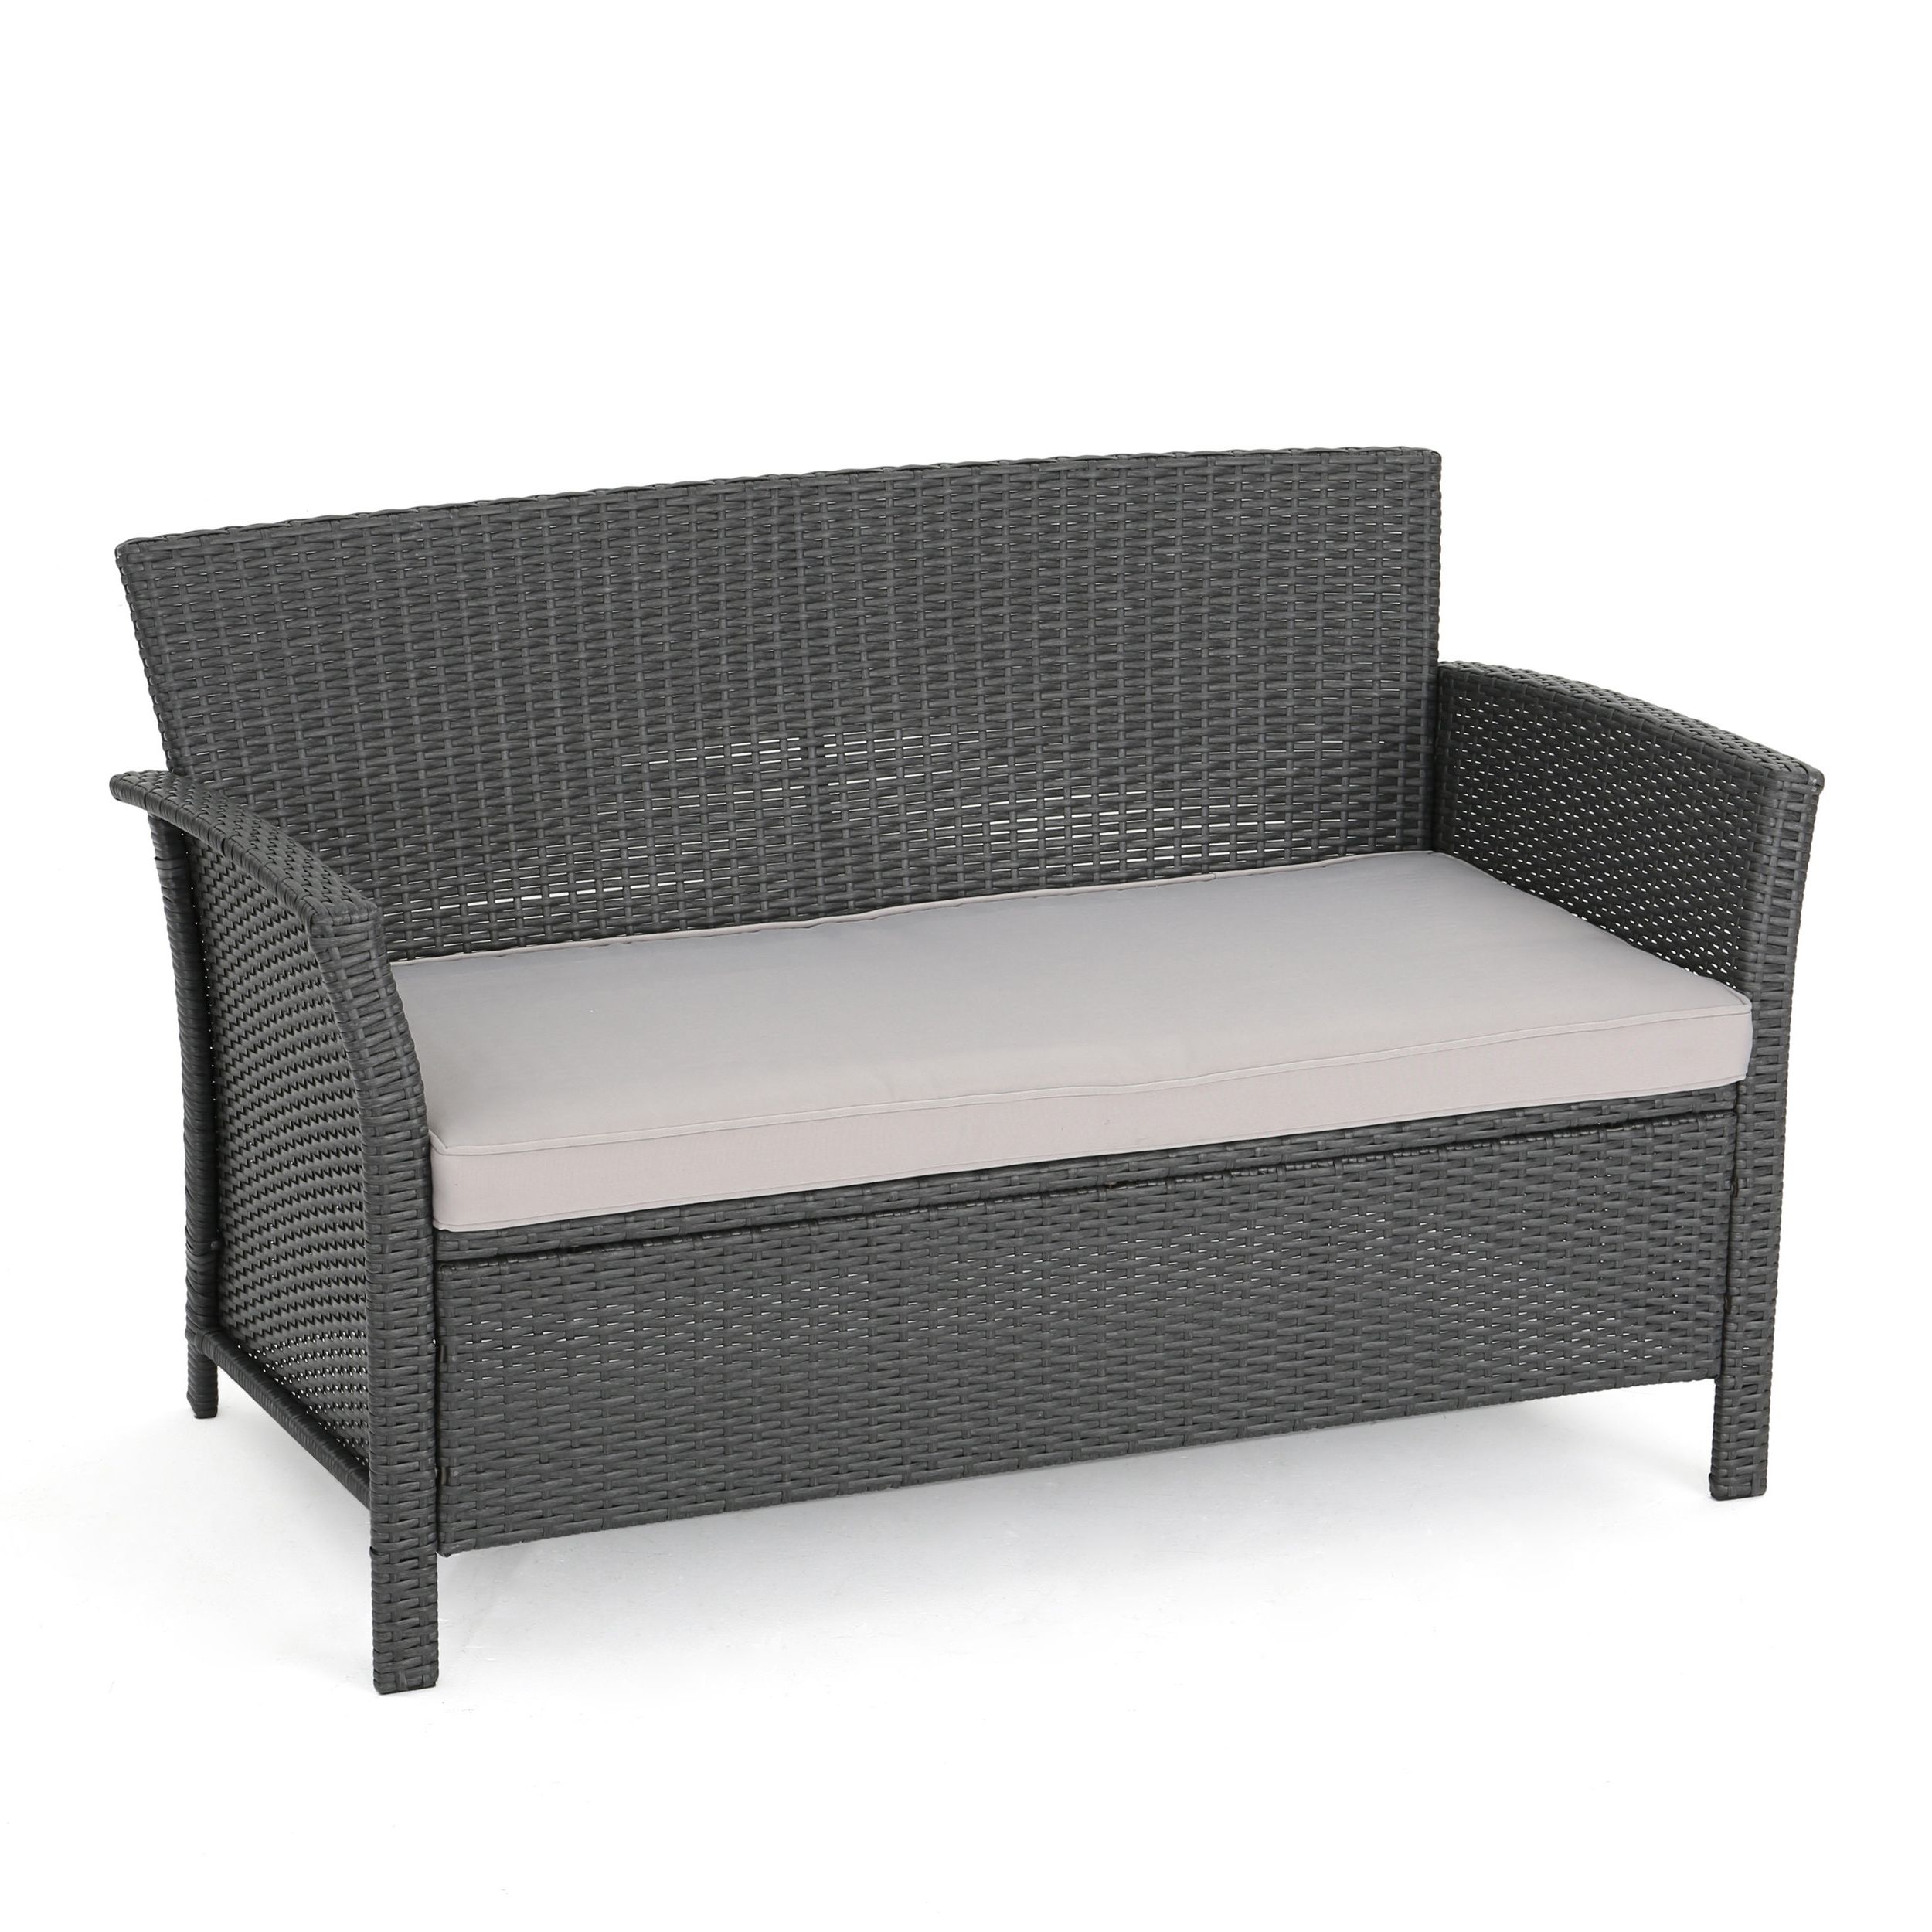 Most Recent Rummond Outdoor Wicker Loveseat With Cushions Pertaining To Belton Loveseats With Cushions (View 21 of 25)